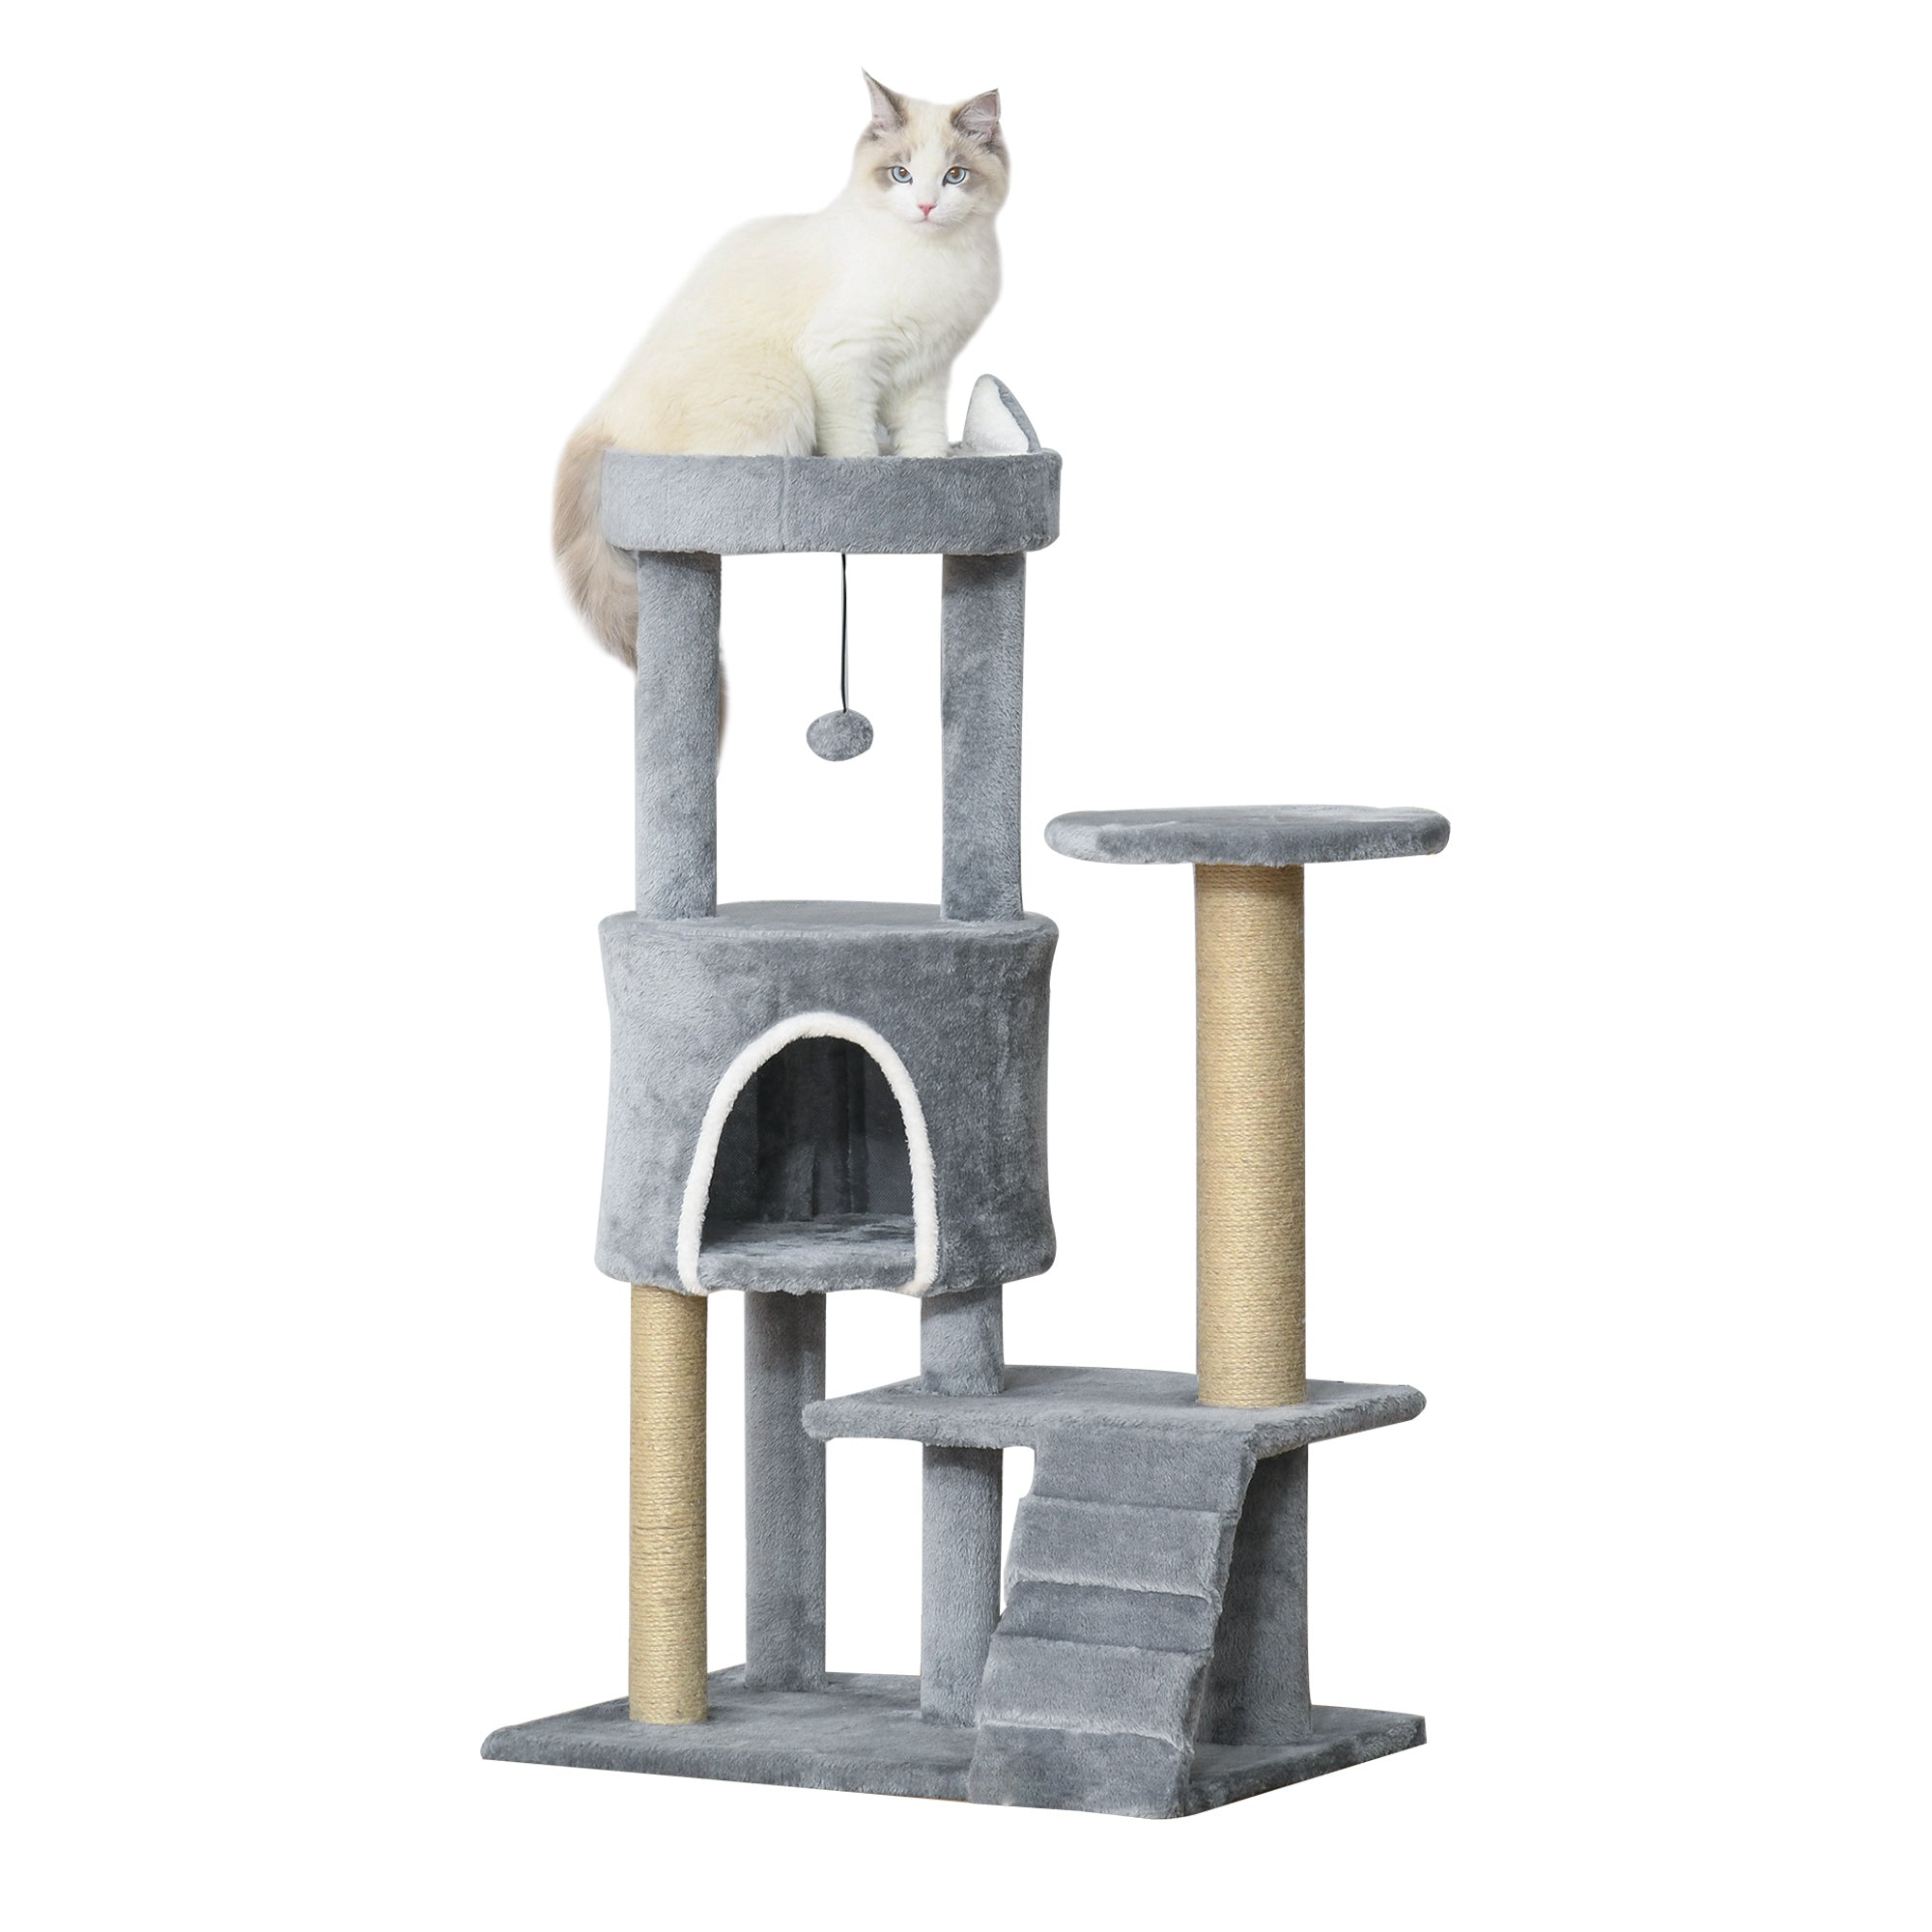 100 cm Cat Tree, Cat Condo Tree Tower for Indoor Cats, Cat Activity Centre with Scratching Posts, Plush Perch, Ladder, Hanging Ball - Light Grey, PawHut,